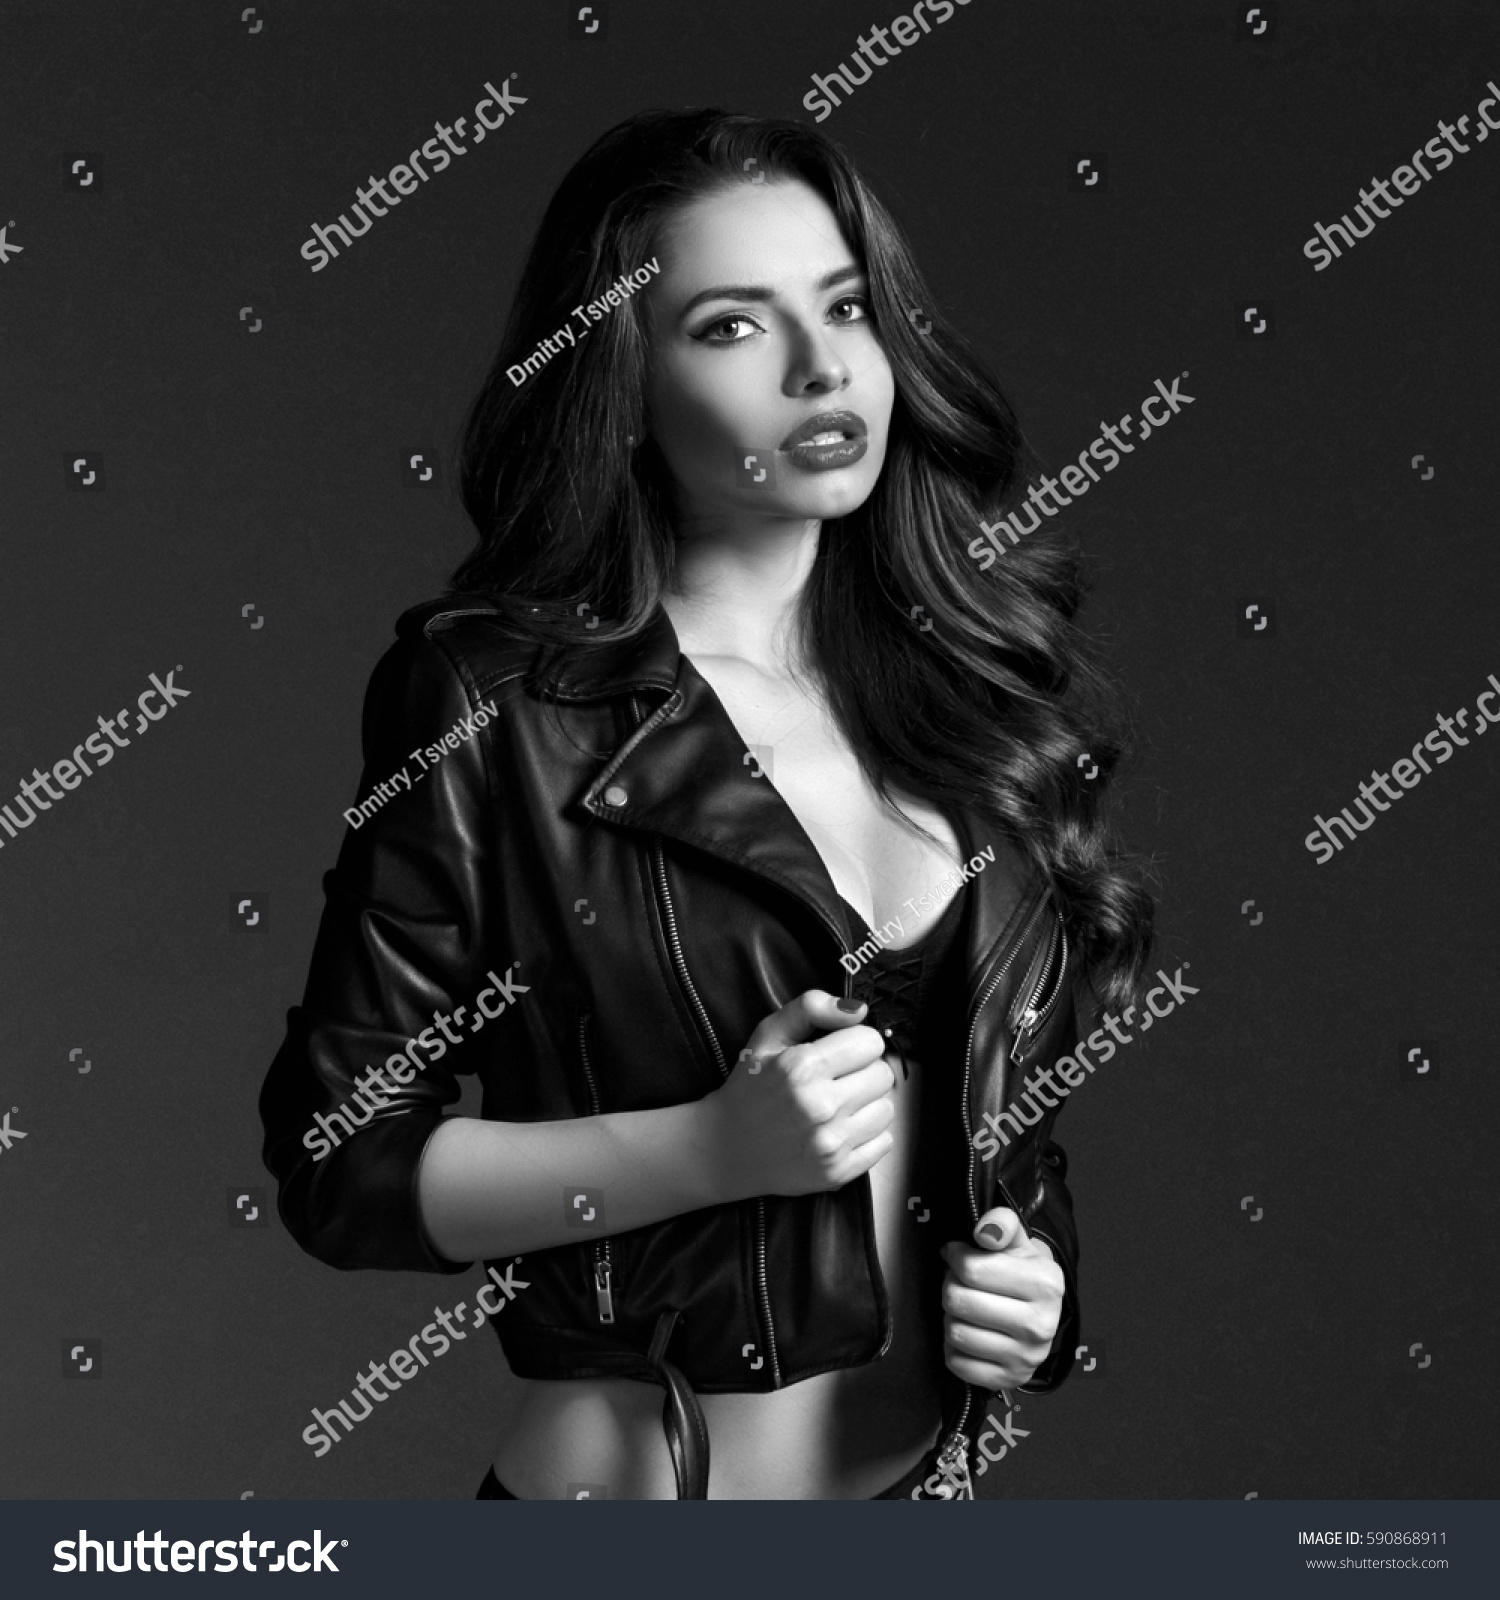 Black and white woman in trenchcoat erotic photo